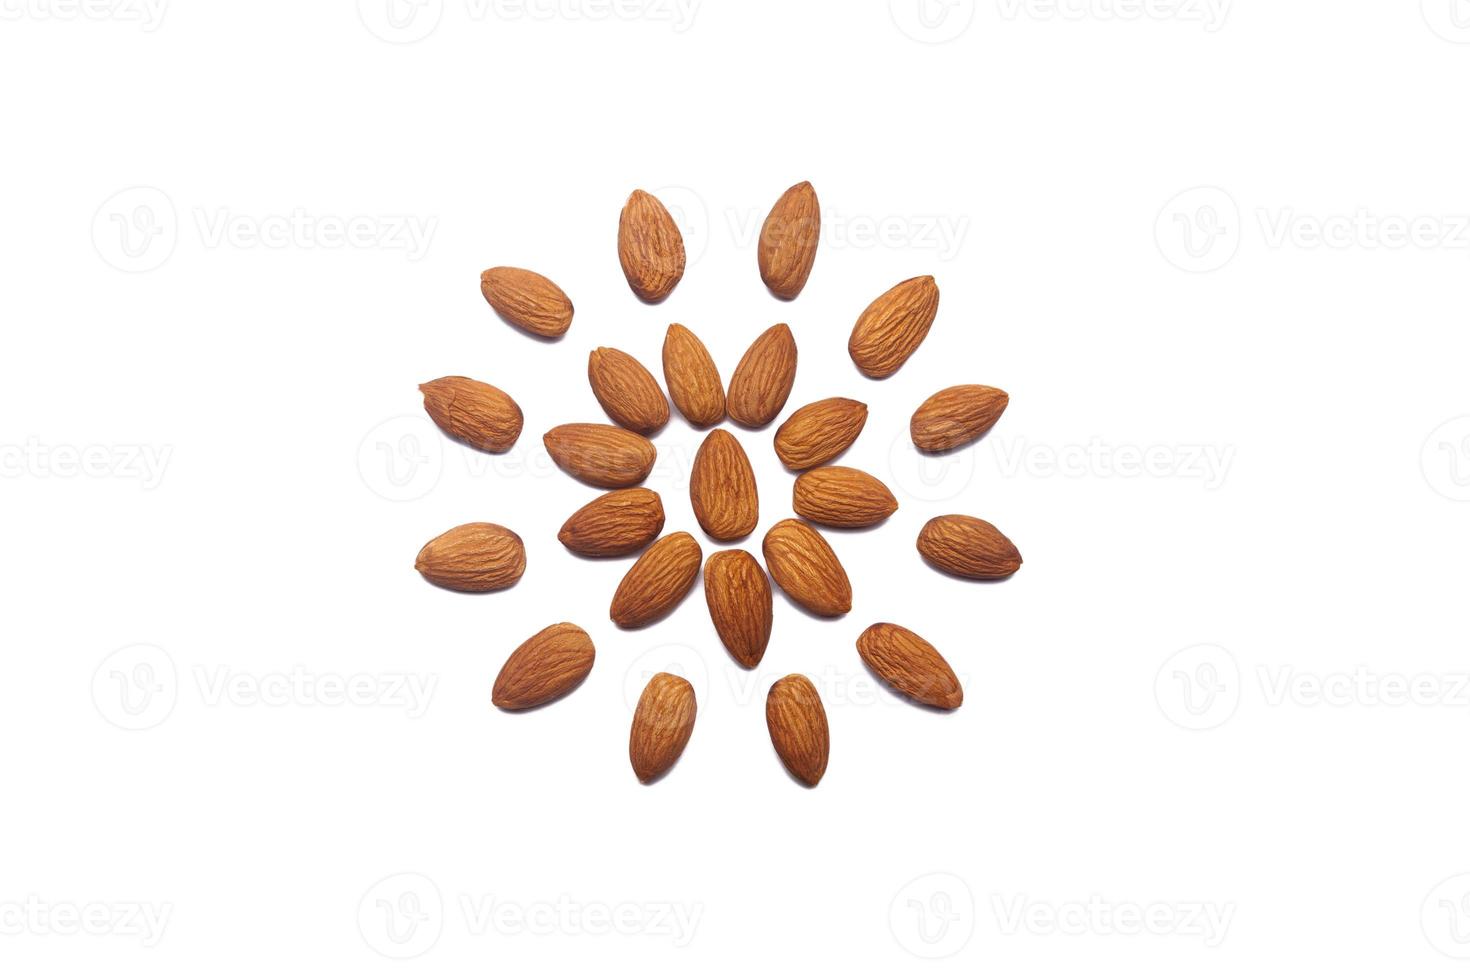 Pattern of Nuts - peeled almonds on a white background in the form of a circle. Concepts about decoration, healthy eating and food background. photo